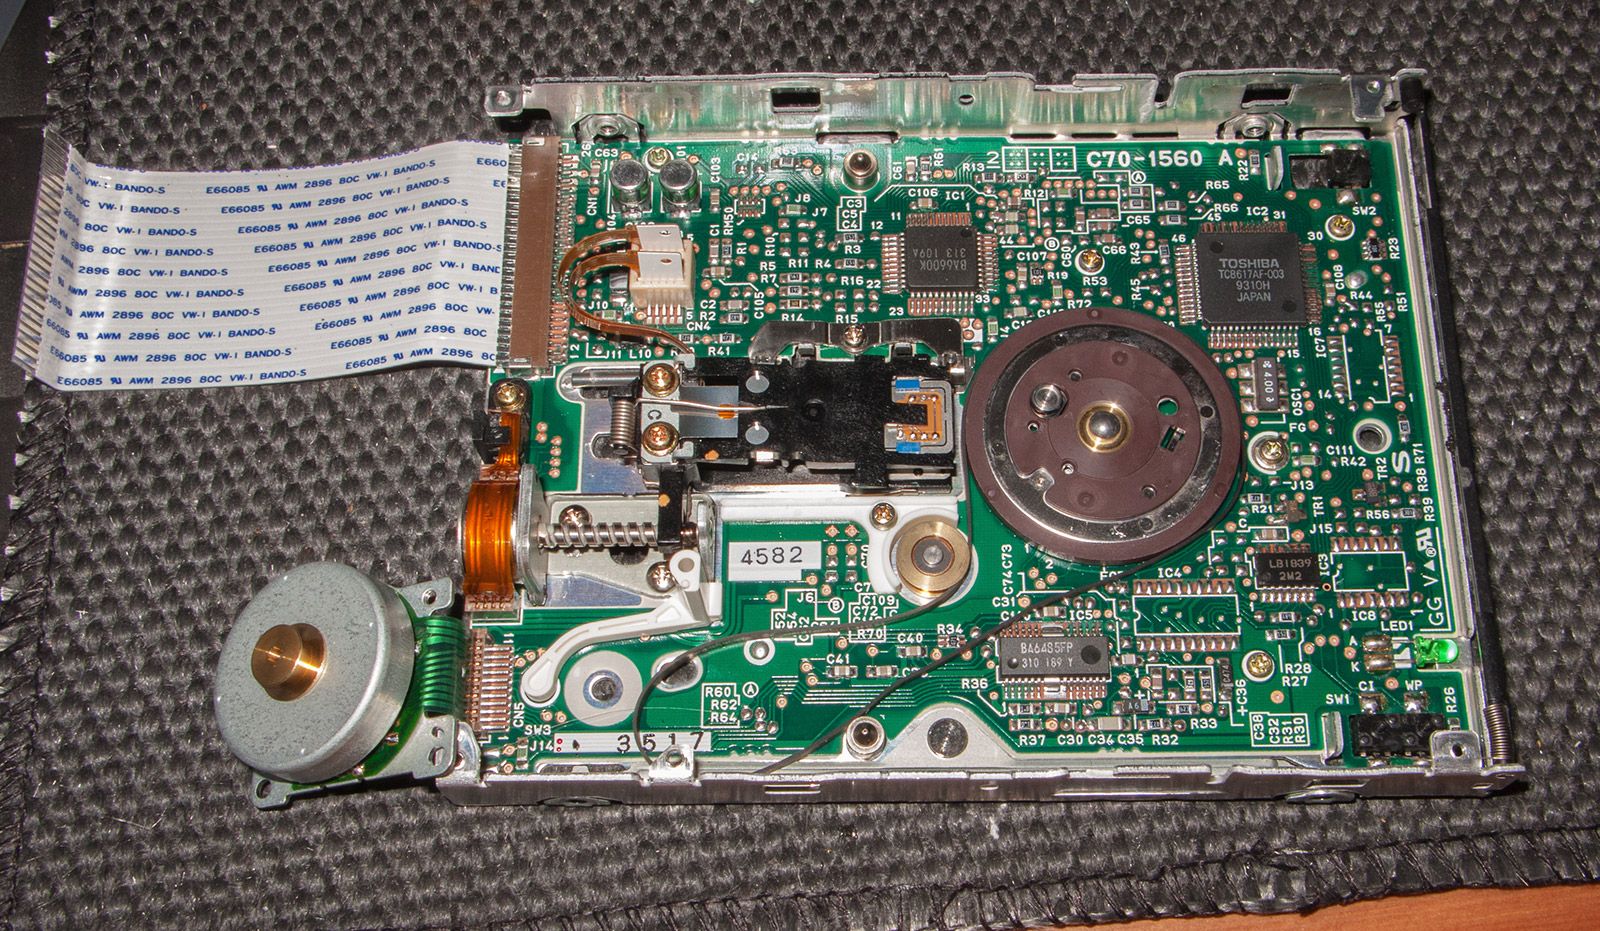 second inside of the Amstrad Notepad NC200 floppy drive